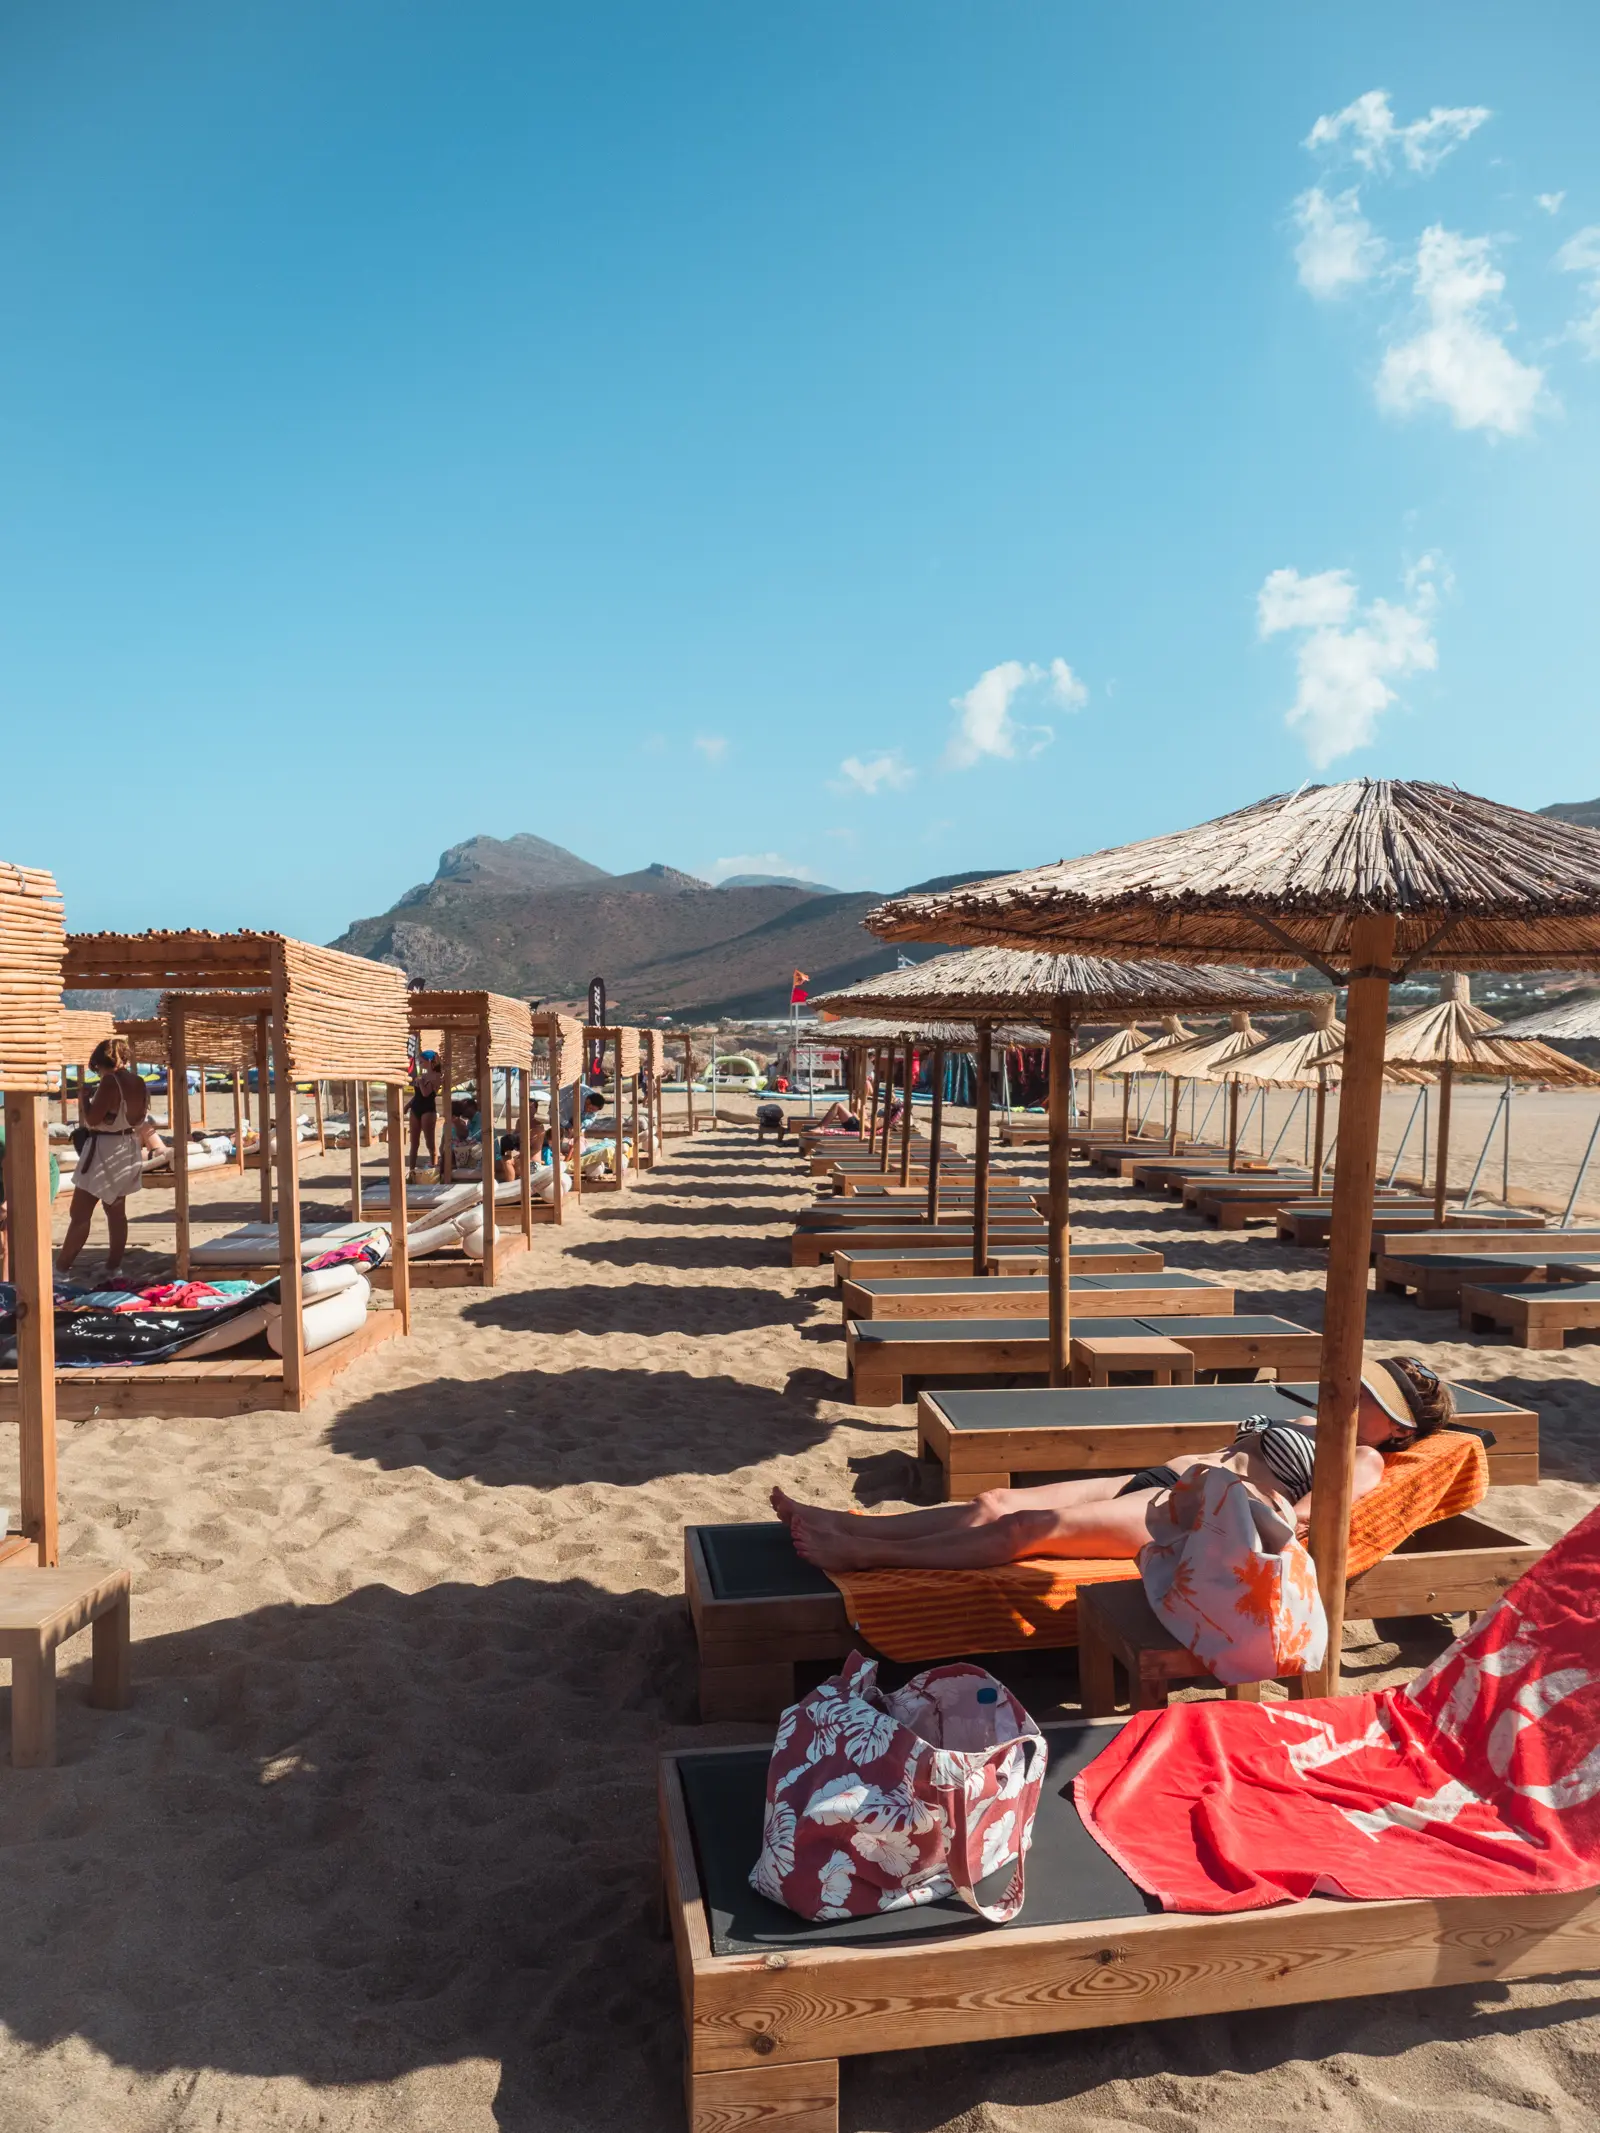 Row of sunbeds with straw parasols to the right and row of wooden cabanas to the left on Falassarna Beach in Crete.